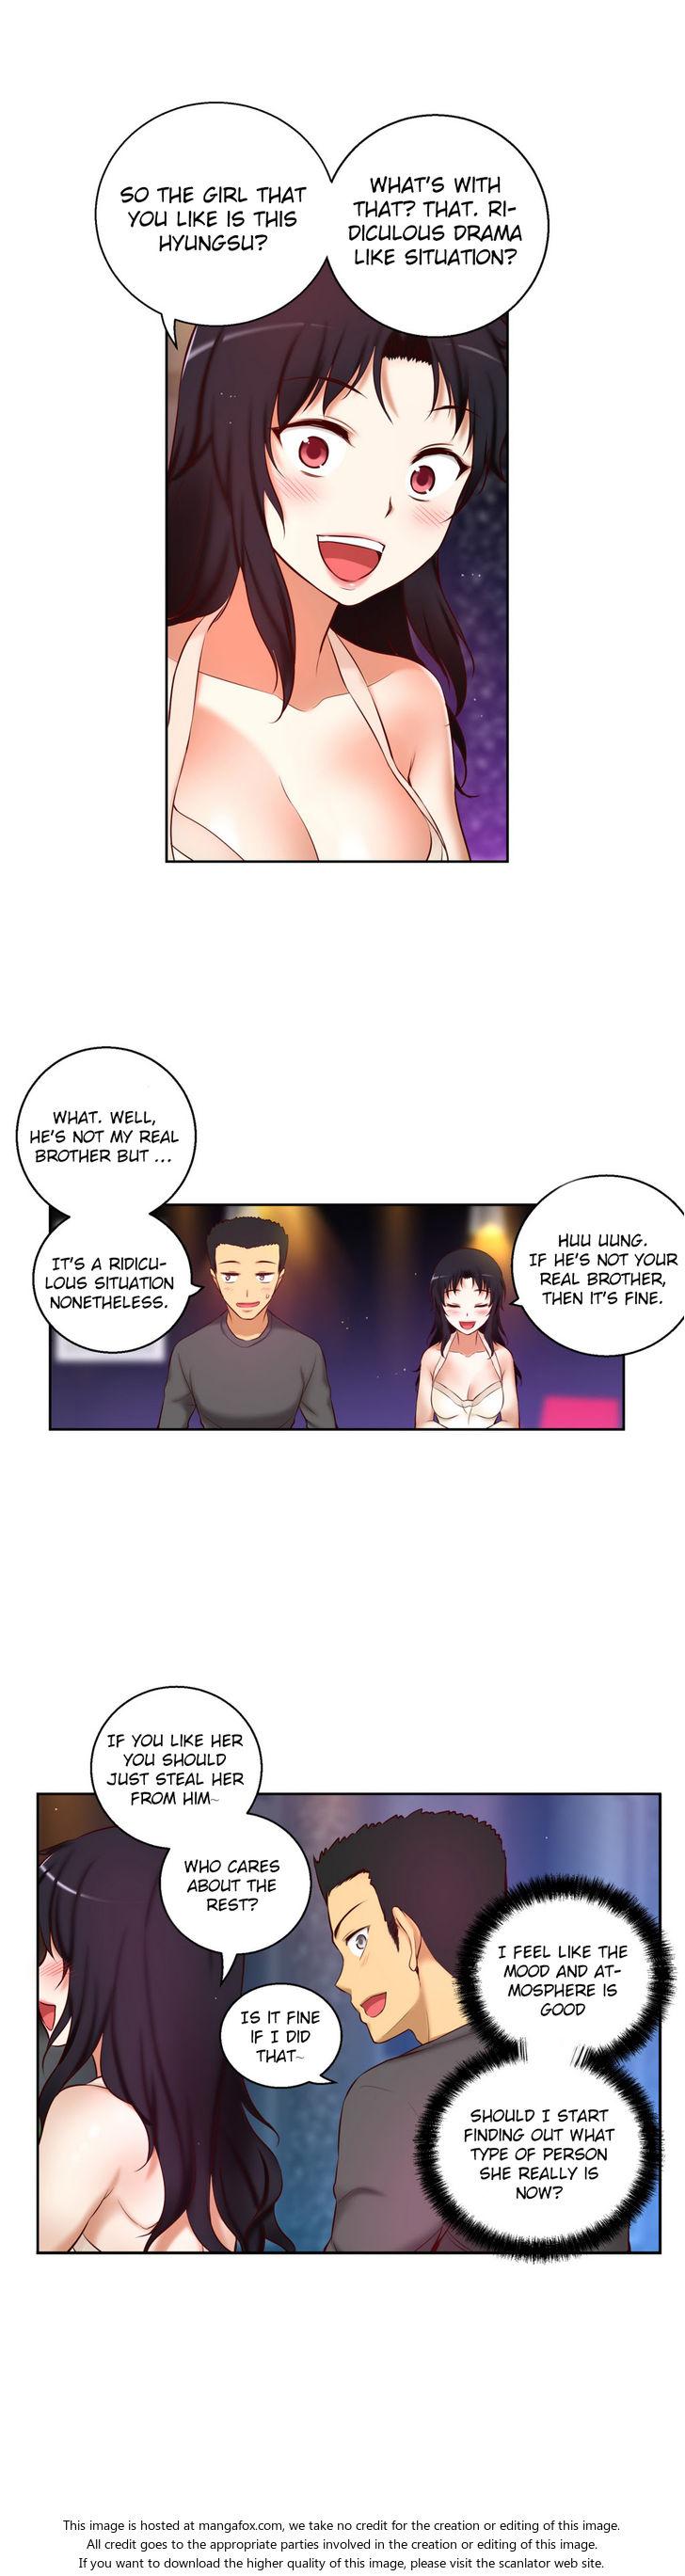 [Donggul Gom] She is Young (English) Part 1/2 1015